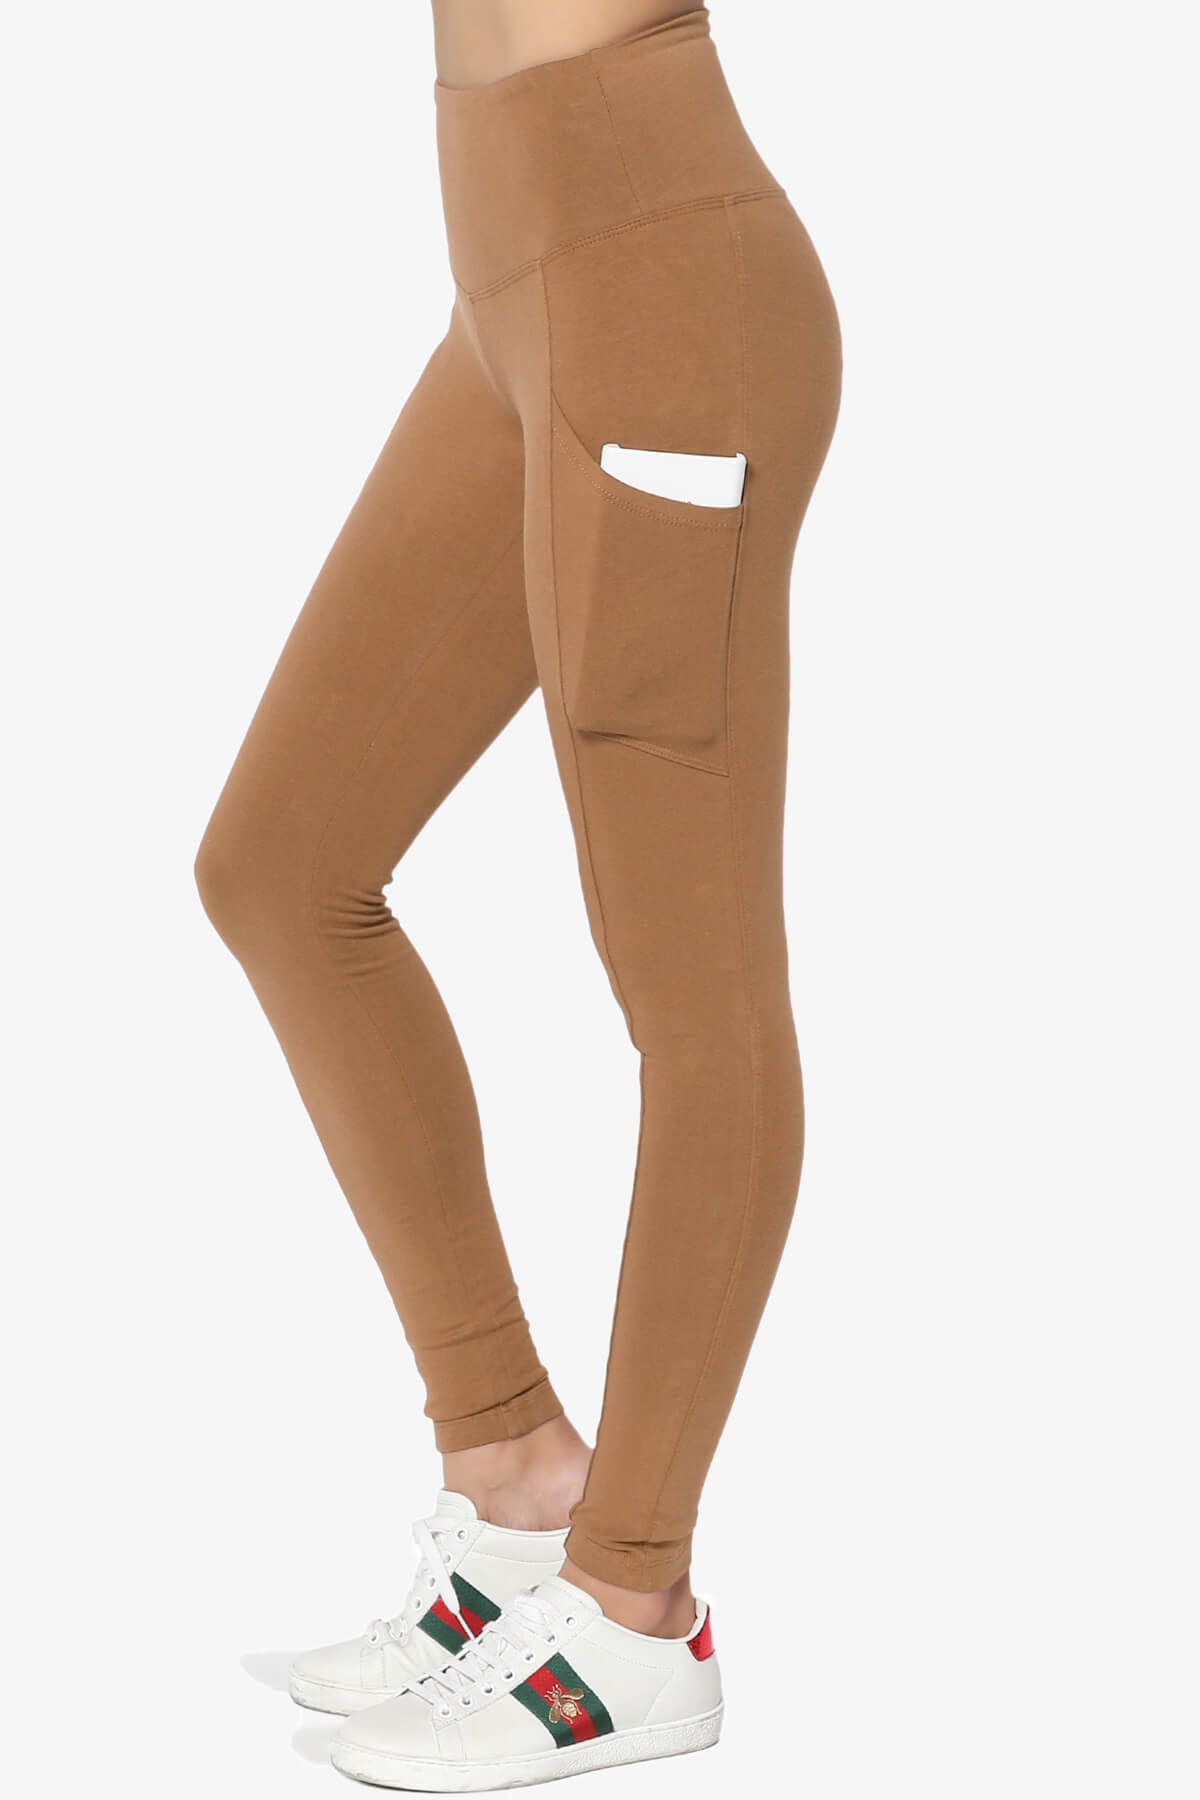 Ansley Luxe Cotton Leggings with Pockets DEEP CAMEL_1